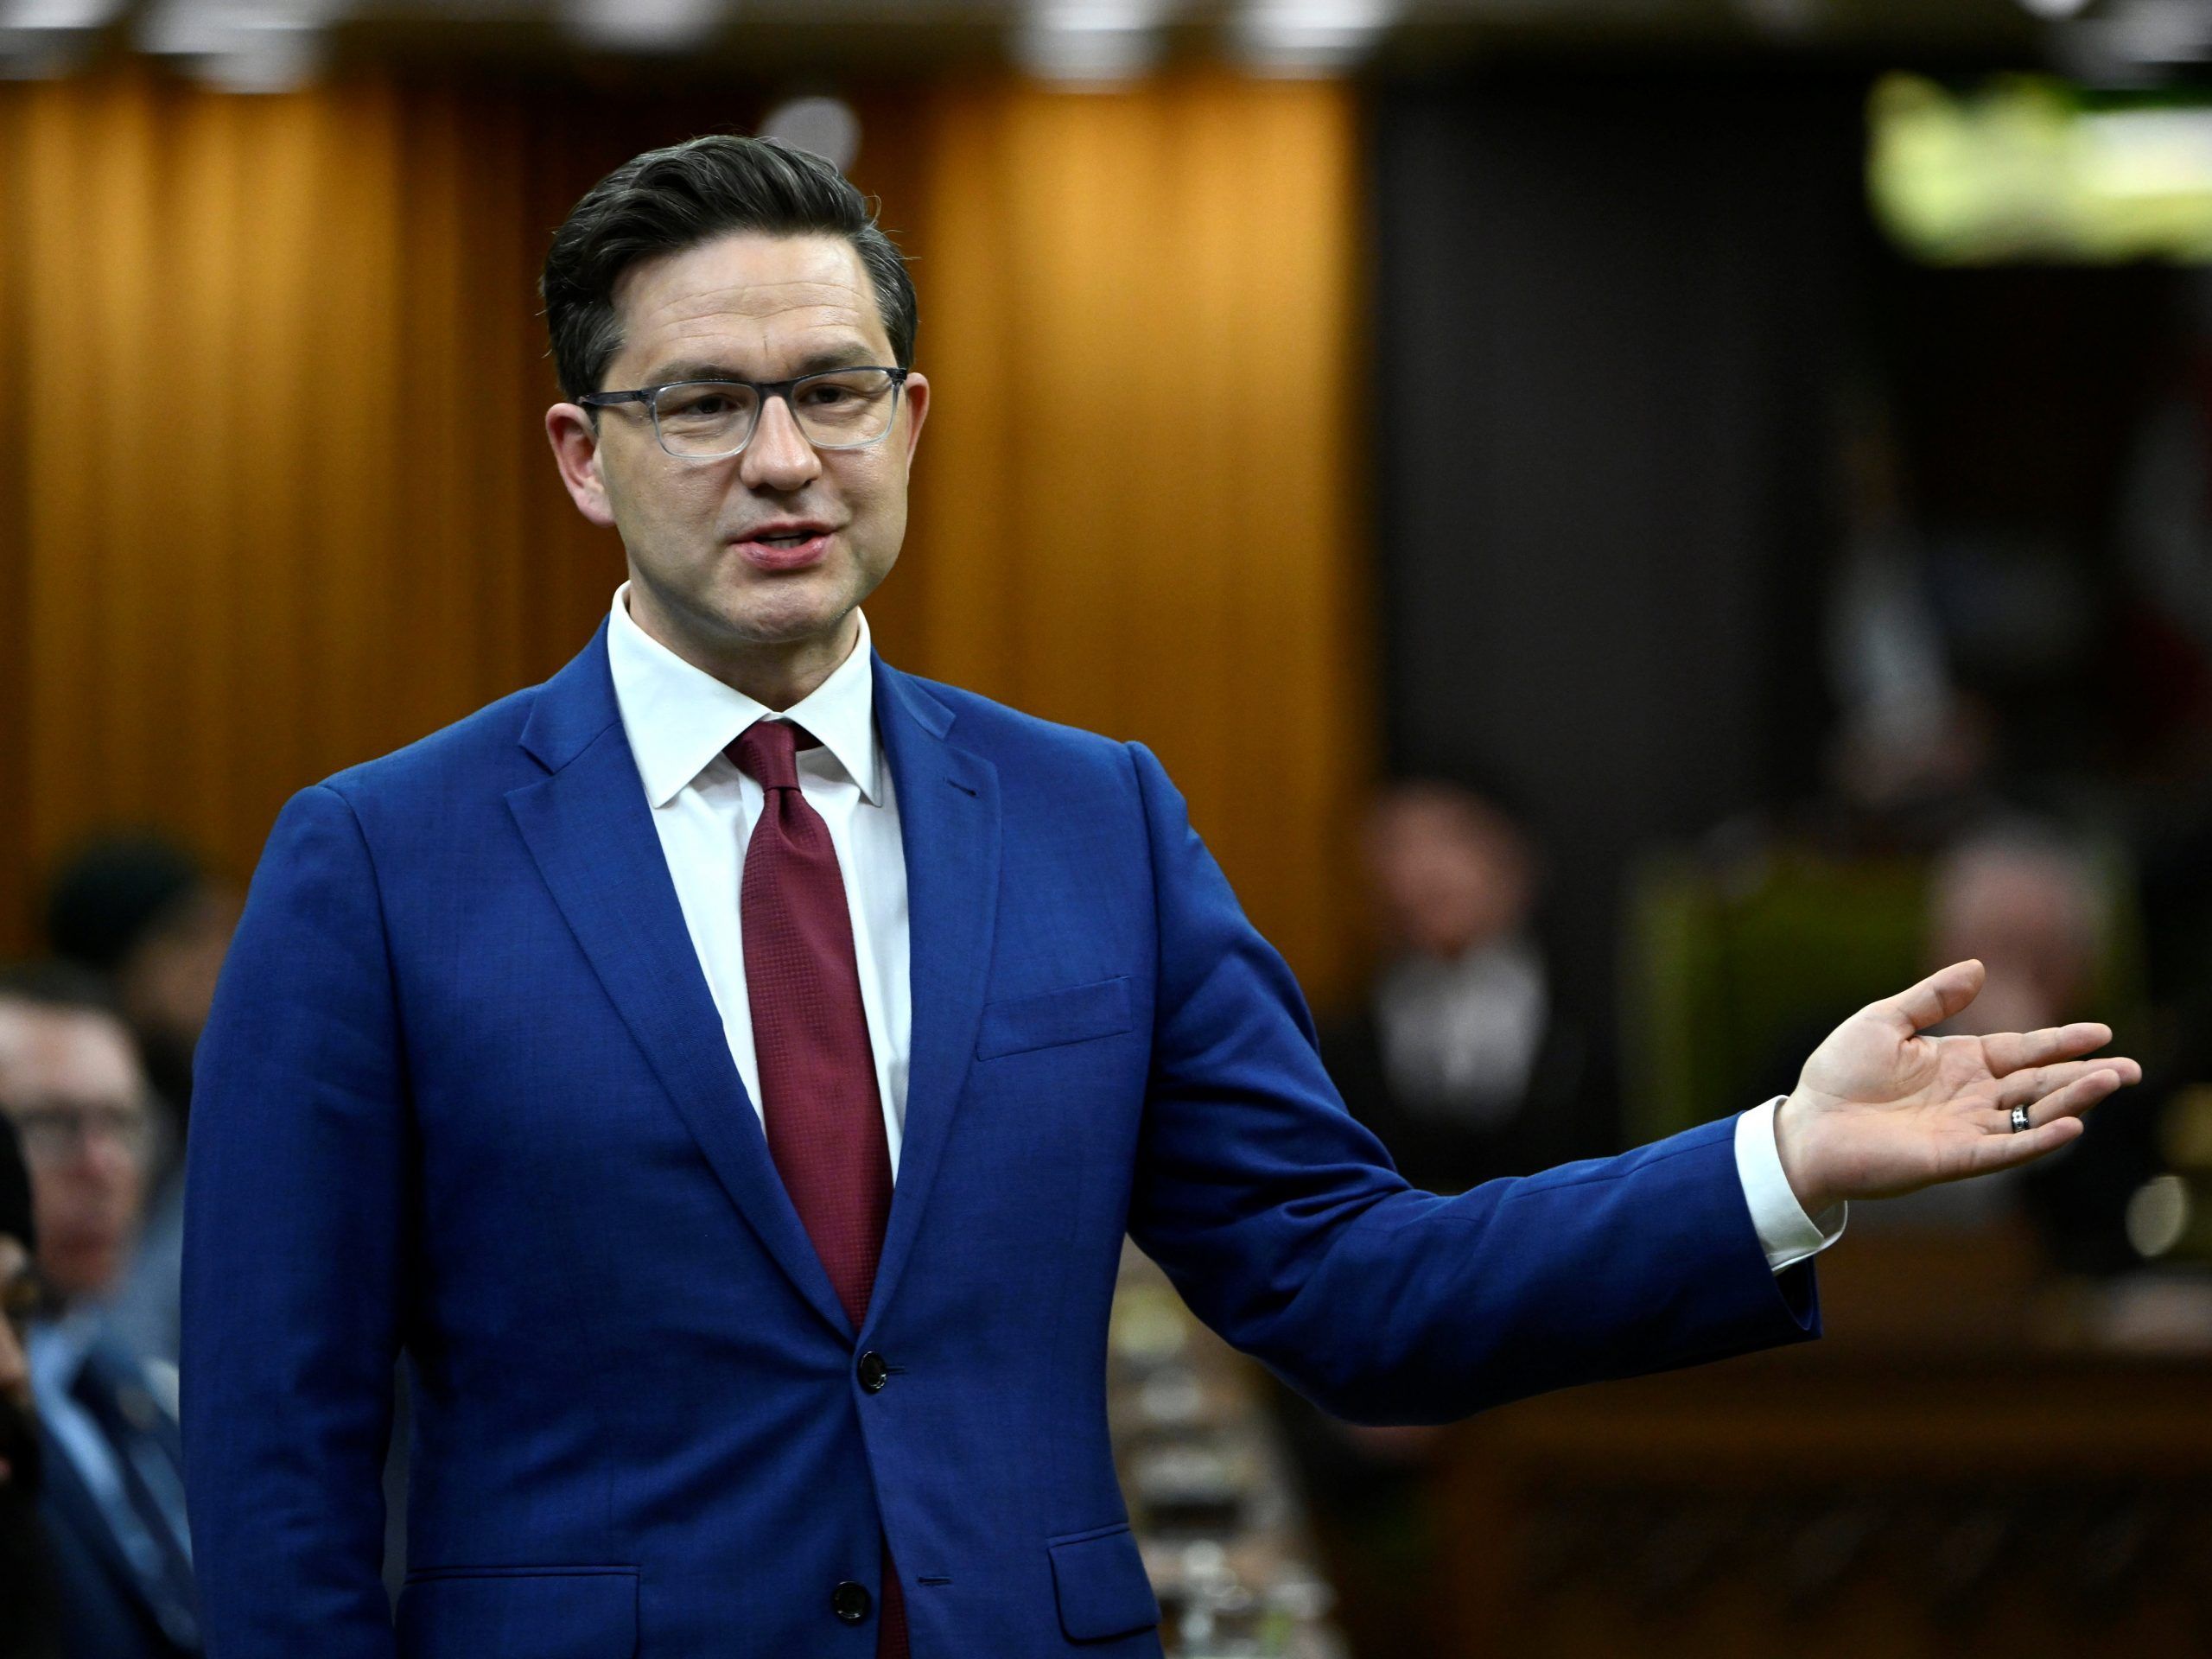 FIRST READING: Poilievre referenced one of Ottawa's most insidious rumours about Trudeau